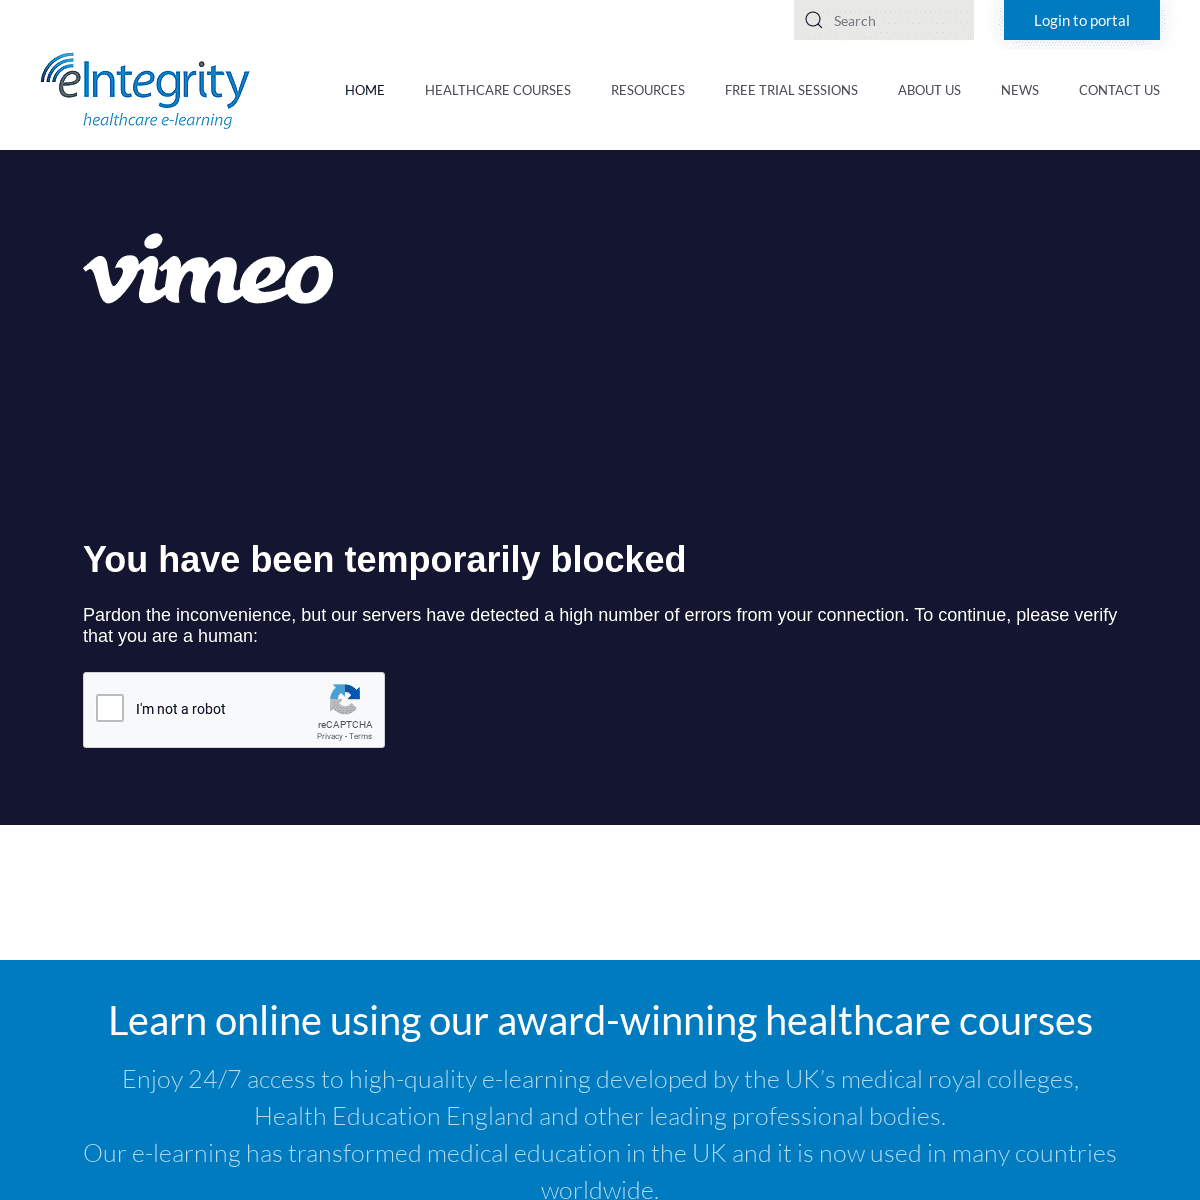 A complete backup of eintegrity.org